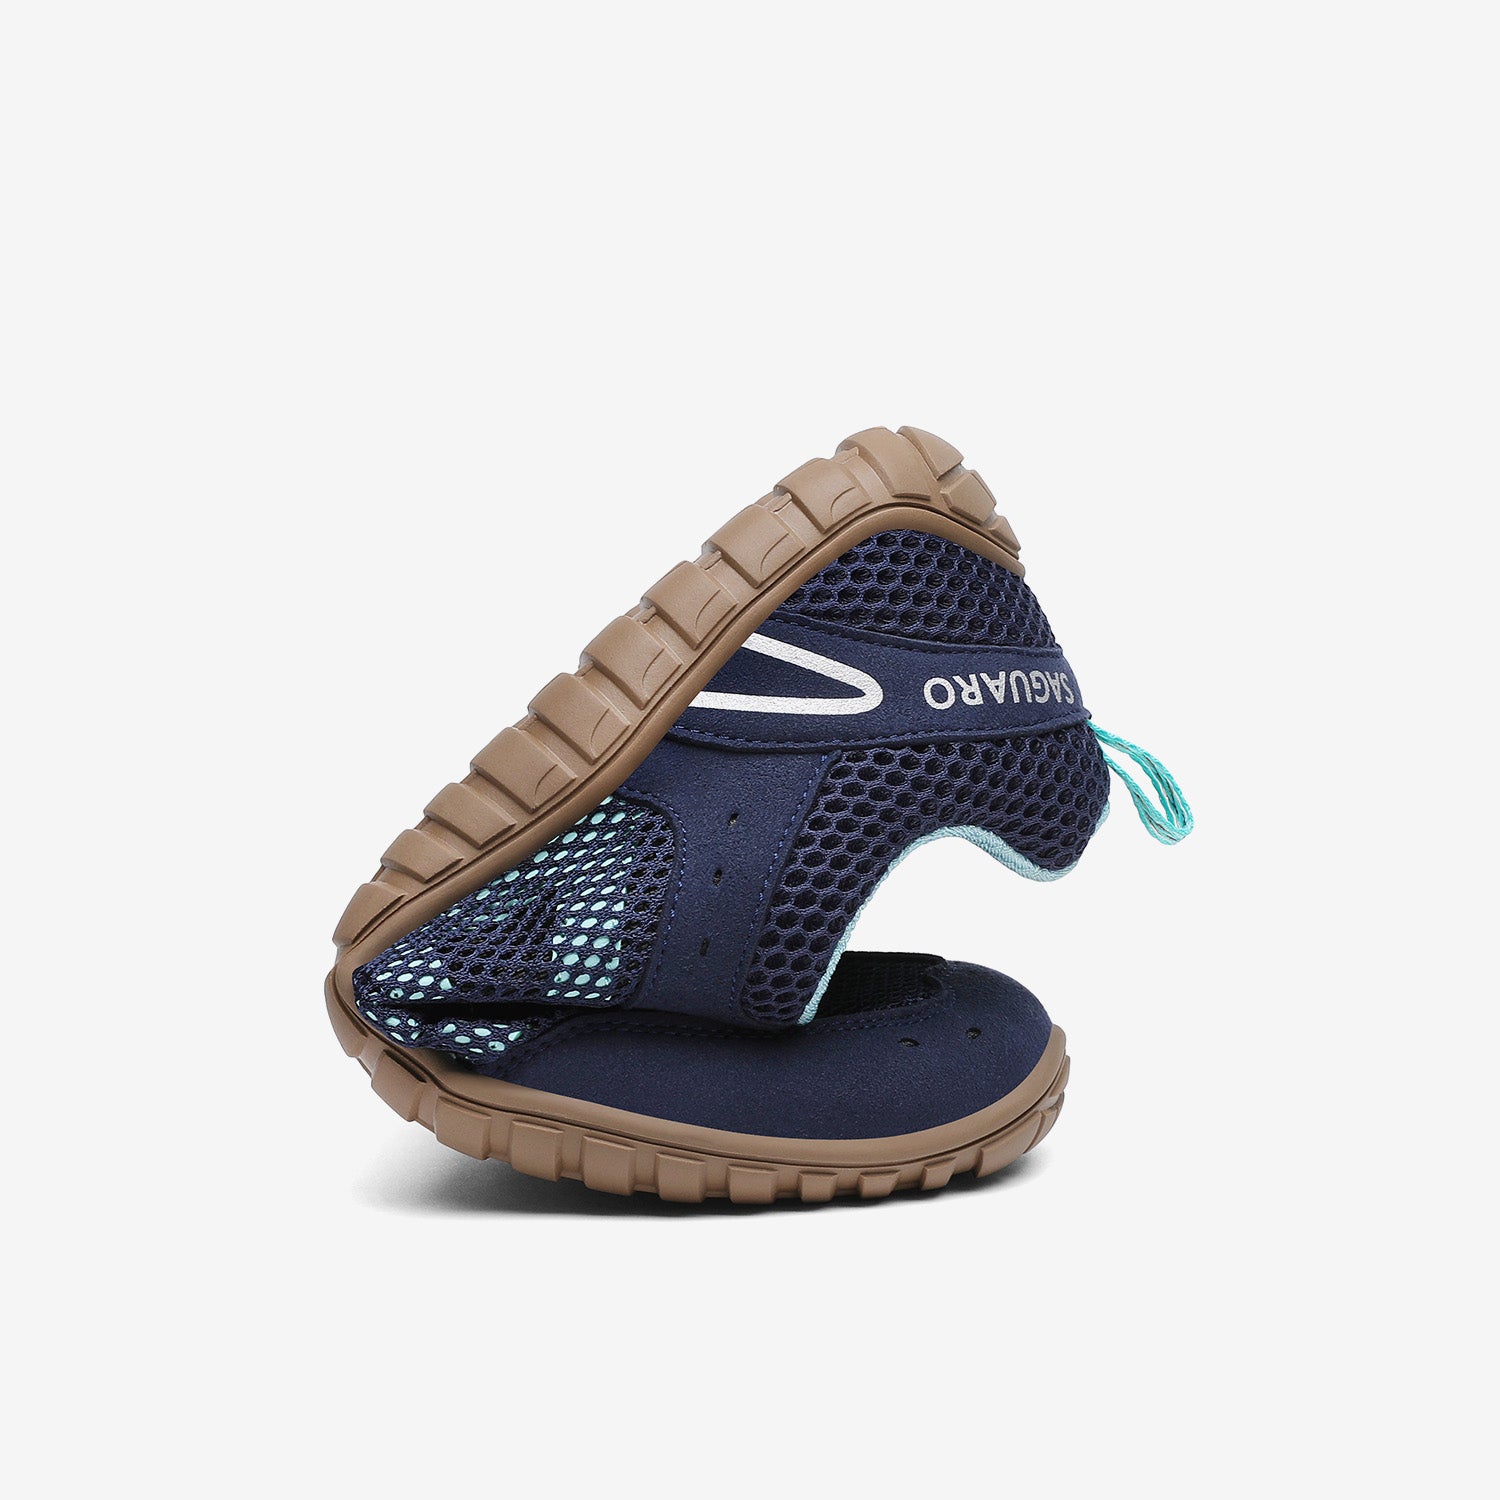 Active IV - Barefoot Shoes - Keep Unrestrained - SAGUARO®